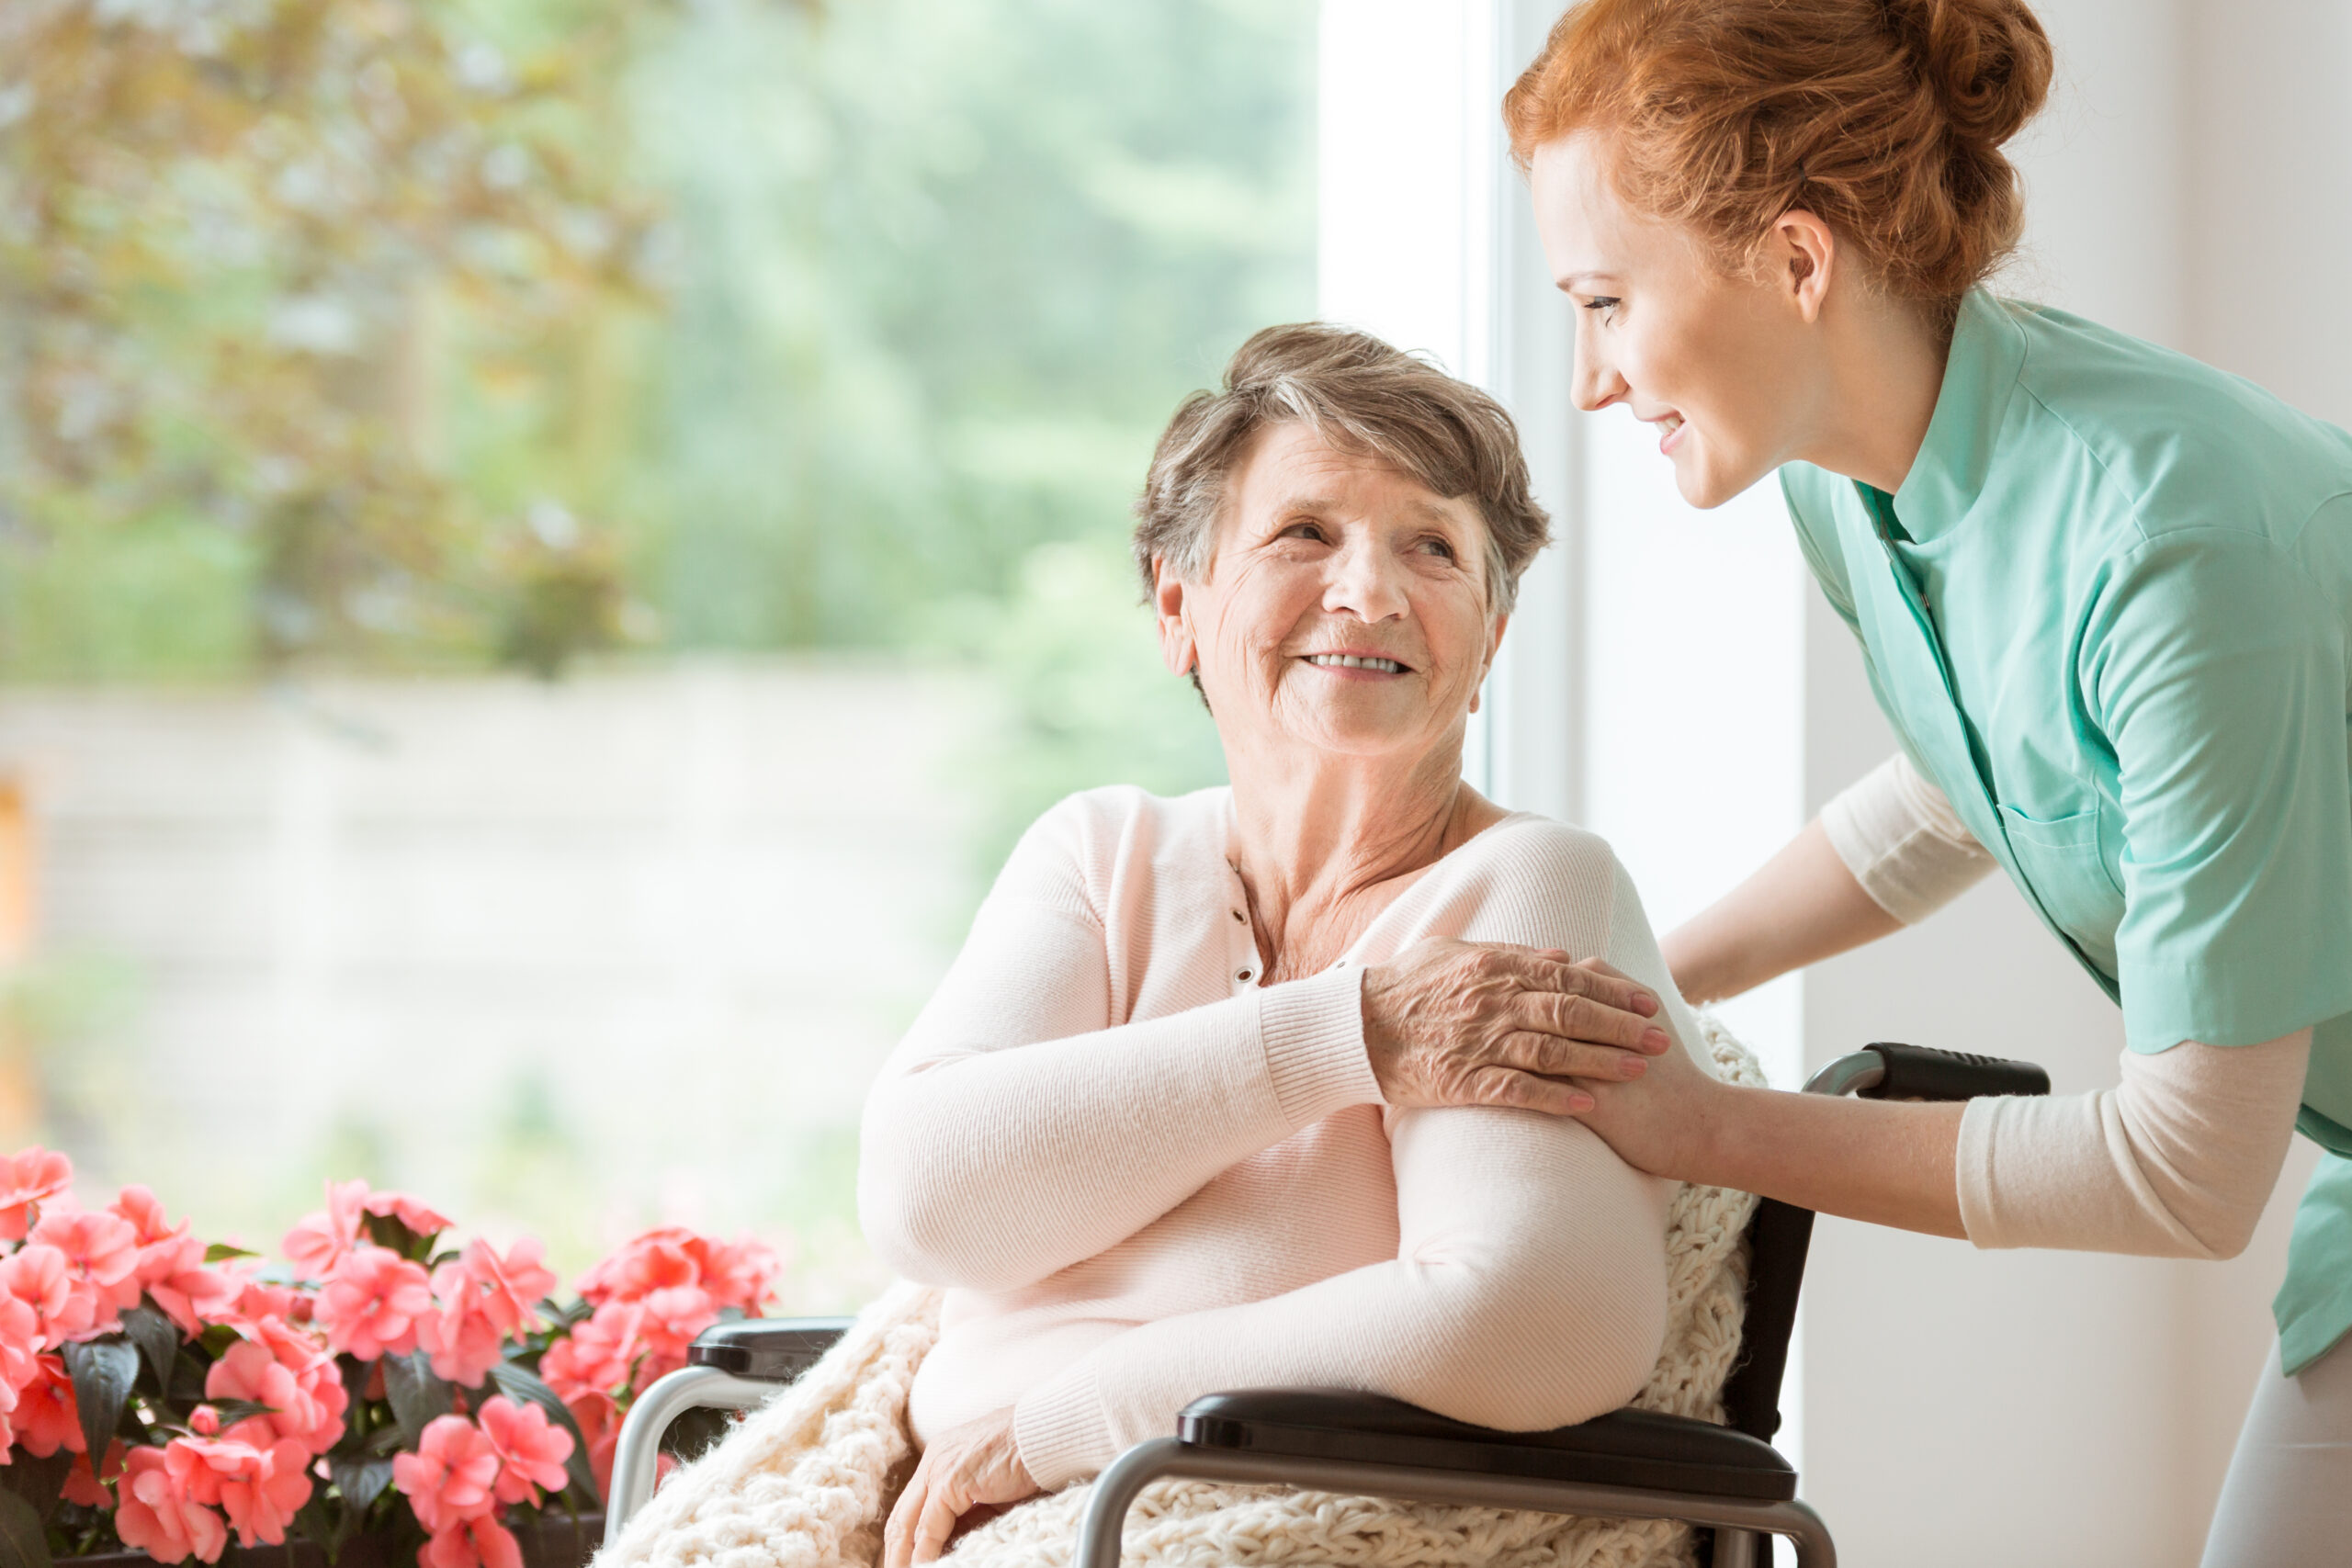 Assisting Hands Home Care - Austin, TX and Surrounding Areas image